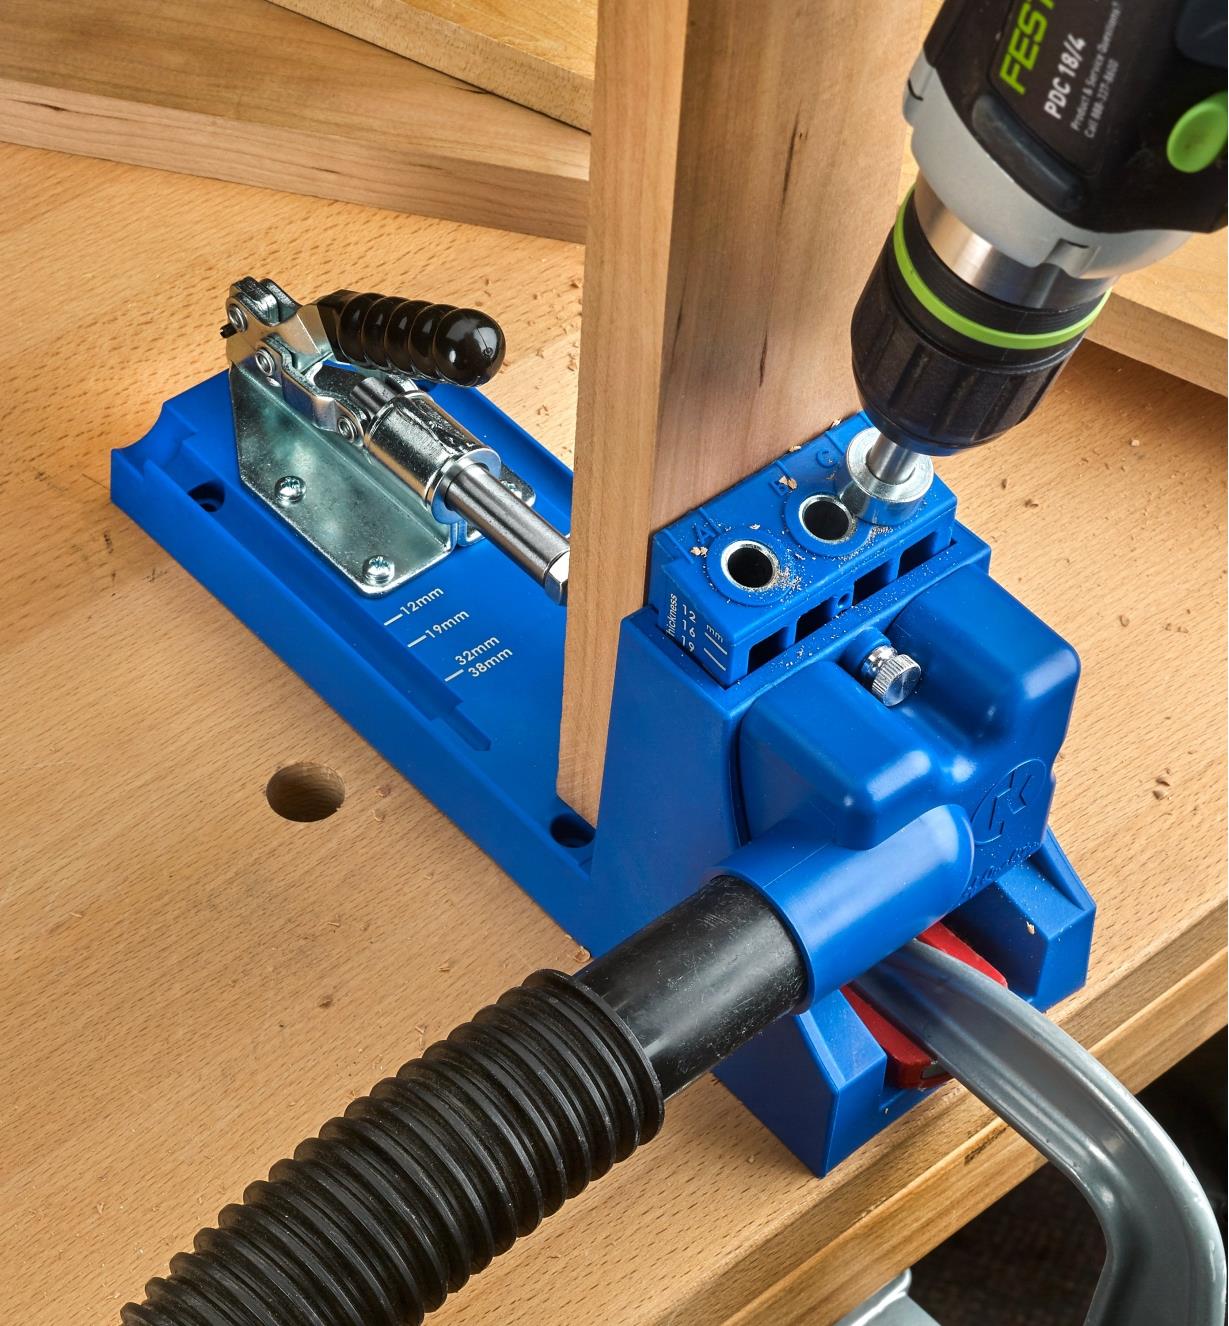 A K4 metric jig on a benchtop, connected to a vacuum hose, used to drill pocket holes for joinery